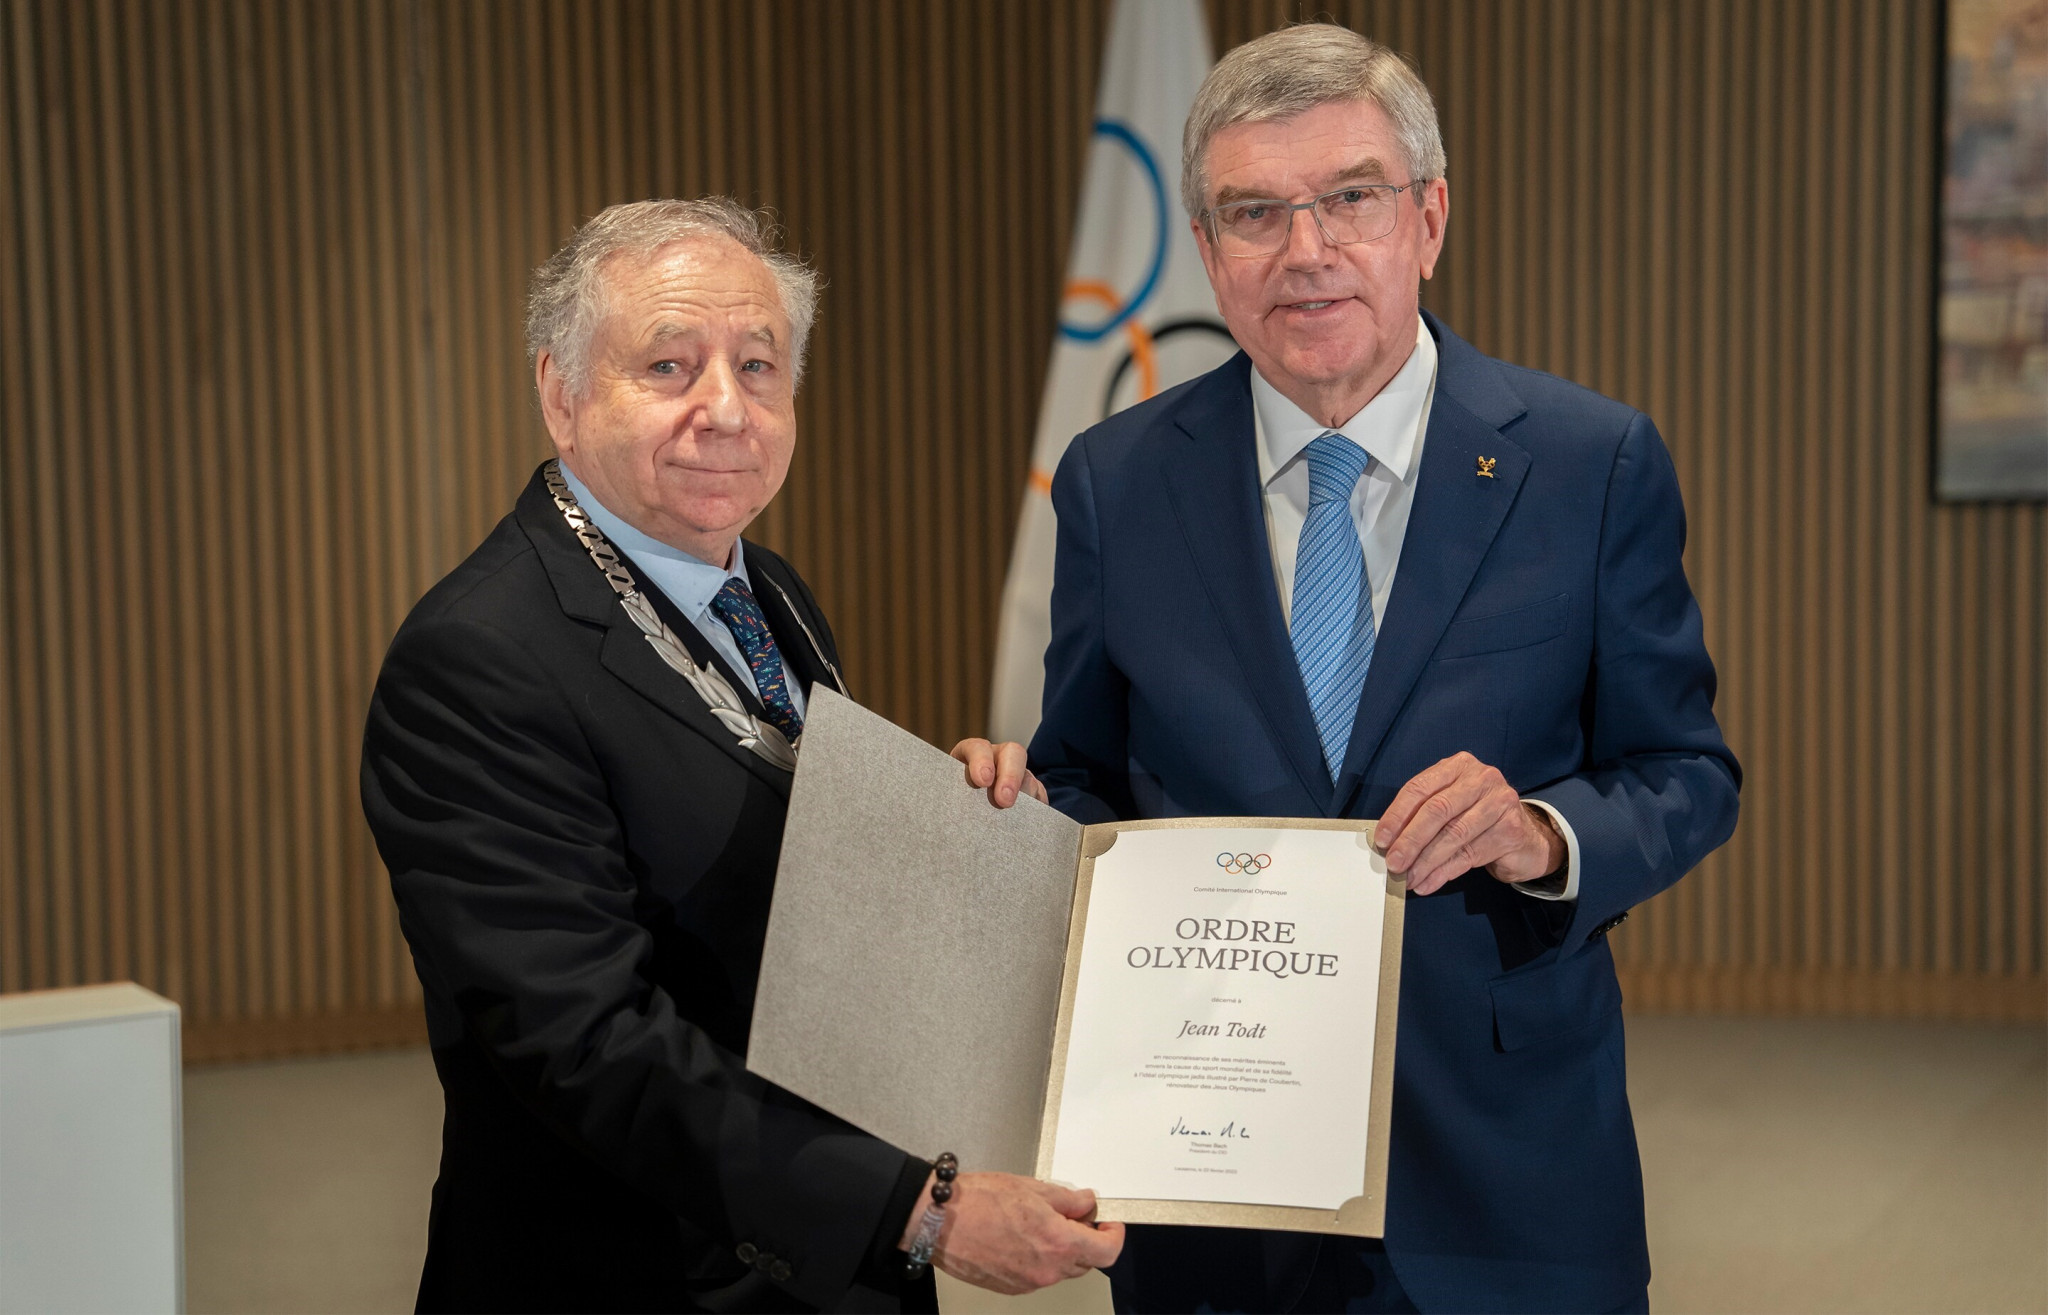 Honorary FIA President Jean Todt was handed the Olympic Order by IOC President Thomas Bach ©IOC